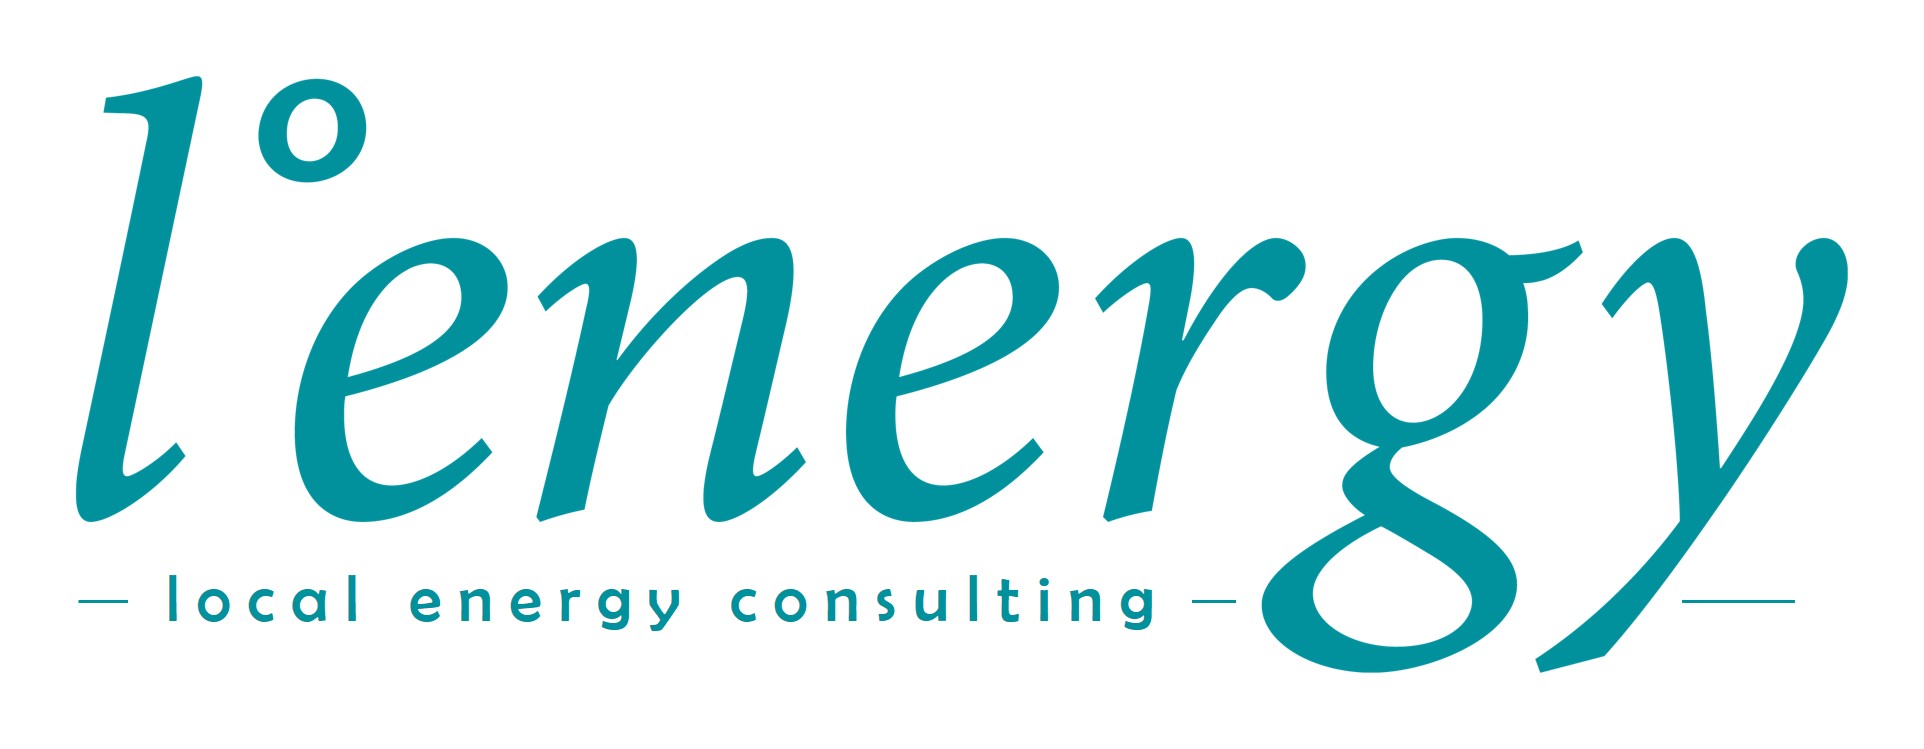 local energy consulting